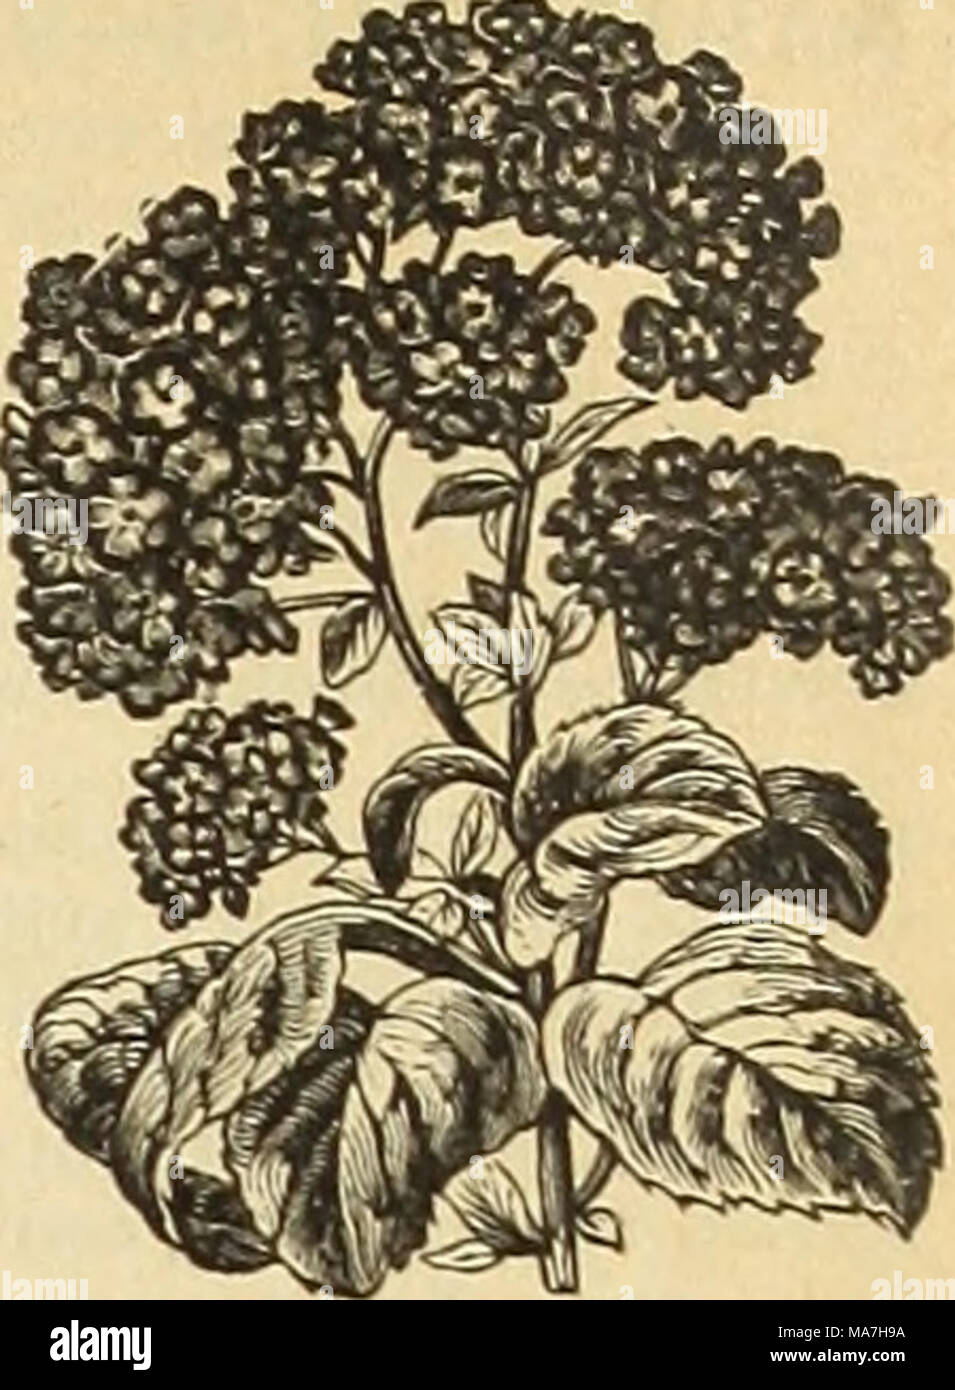 . E. H. Hunt's catalogue . GLOXINIA. Trade Pkt. Oz. Glaucium Luteum.  Geranium, apple scented 1,000 seeds, S2.00; 100 Zonale, single, mixed- Gilla, mixed.  .. Defiance, new, Godetia, finest mixed - Lady Albemarle   10 Lady Satin Rose Gomphrena Globosa, white, red, golden or mixed Gypsophila Paniculata, white, fine for bouquets Elegans, white, &quot; &quot; Helianthus (Sunflower) Cucumerifolius or Miniature Argophyllus, leaves are clothed with a silvery down Nanus Folis Variegatis, green and yellow foliage. Helichrysum Alonstrosum, Dr. Livingstone, dark  Snowball, white. Hollyhock, double wh Va Stock Photo